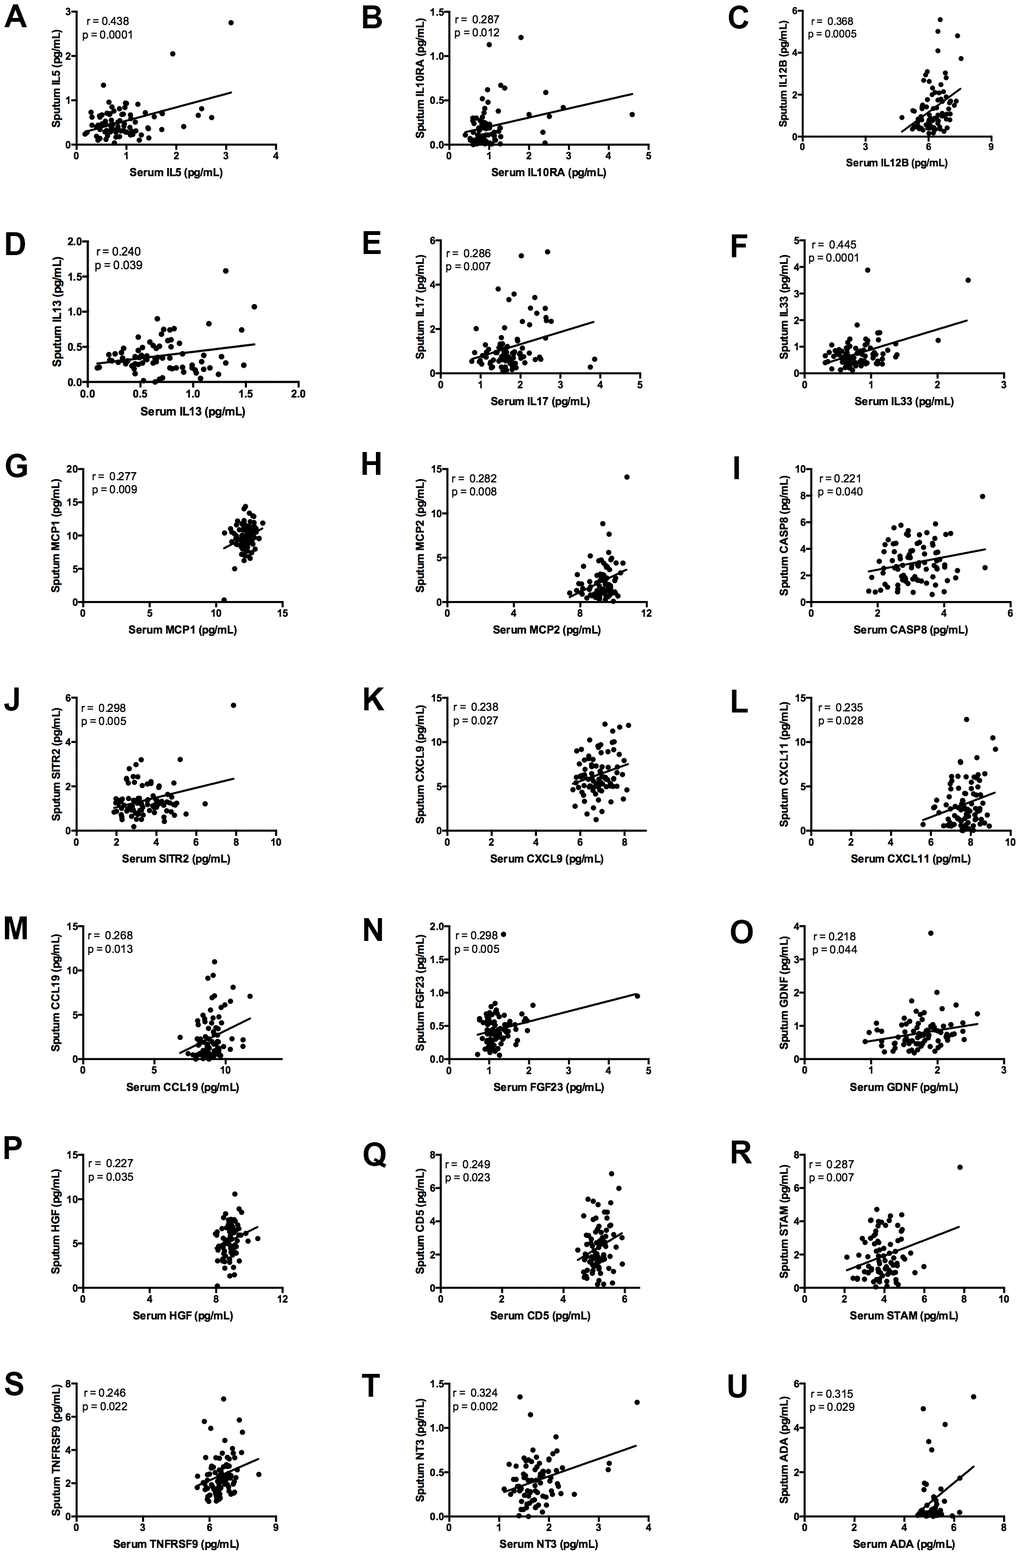 Graphs showing correlation between plasma and induced sputum levels of statistically significant biomarkers. Measurement of: (A) IL5; (B) IL10RA; (C) IL12B; (D) IL13; (E) IL17; (F) IL33; (G) MCP1; (H) MCP2; (I) CASP8; (J) SIRT2; (K) CXCL9; (L) CXCL11; (M) CCL19; (N) FGF23; (O) GDNF; (P) HGF; (Q) CD5; (R) STAM; (S) TNFRSF9; (T) NT3; (U) ADA. The continuous line indicates the correlation between the two variables.